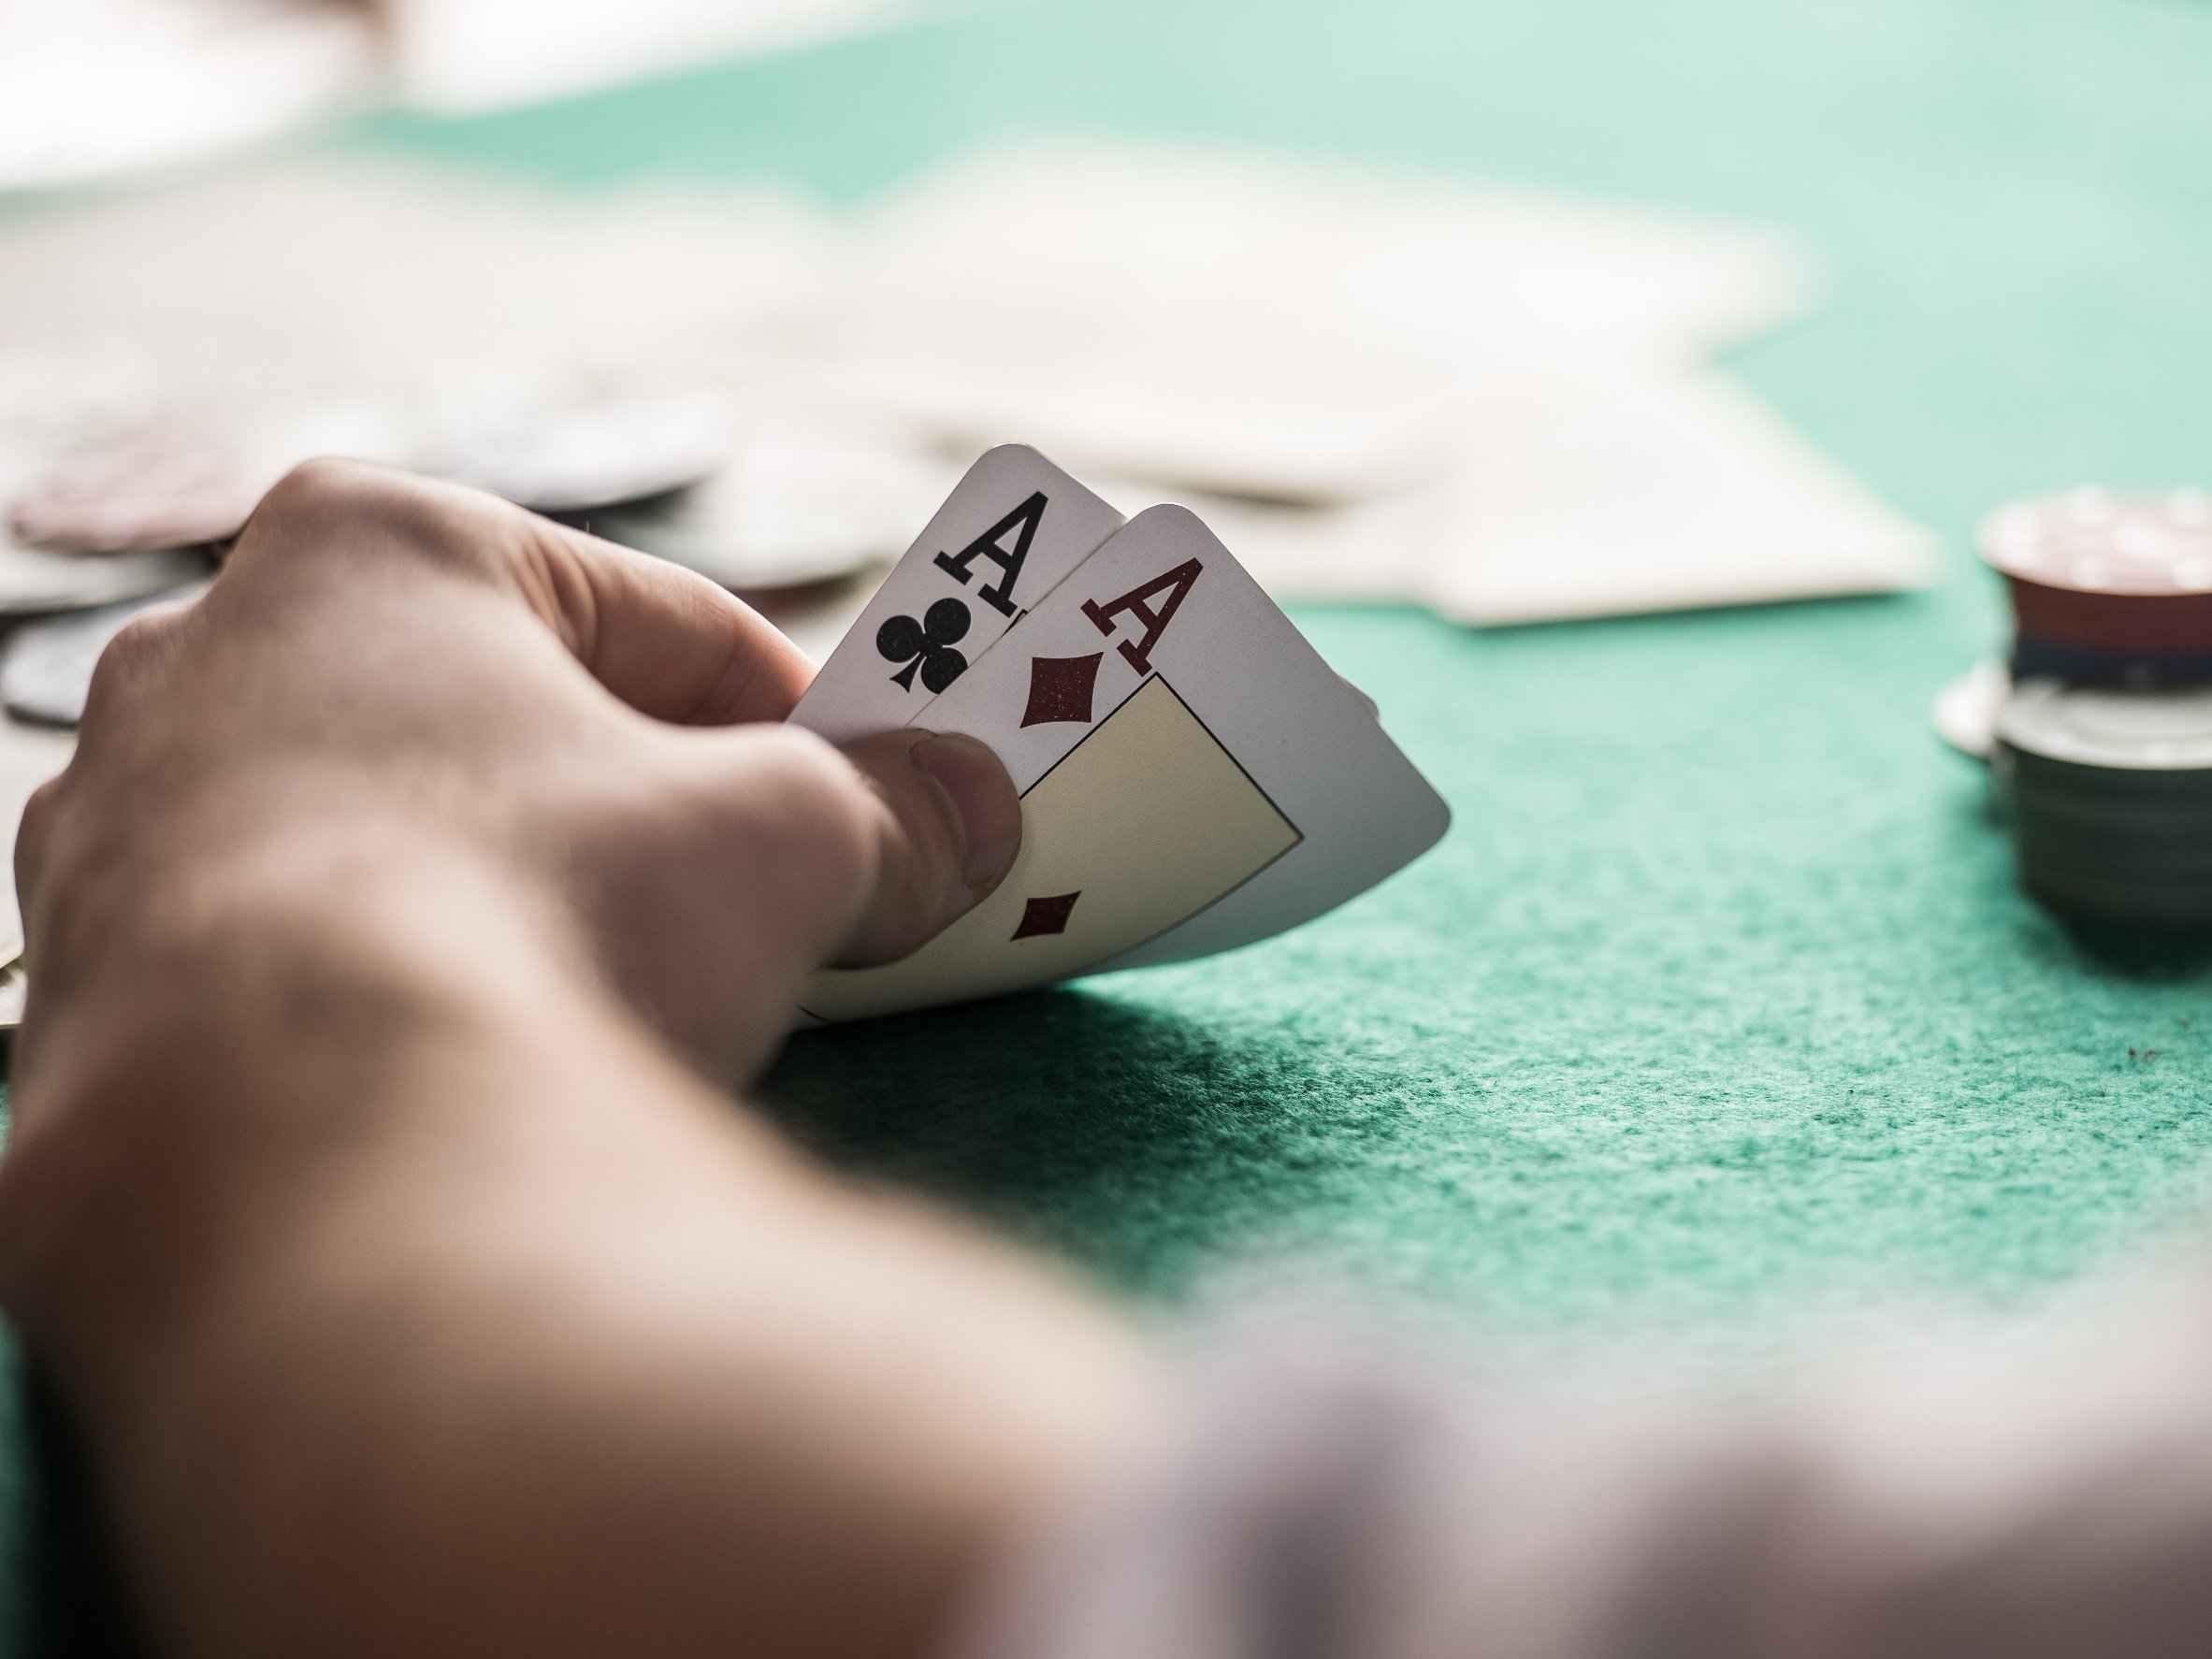 Read more about the article HISTORY OF POKER FROM ITS ORIGIN TO THE MODERN AGE